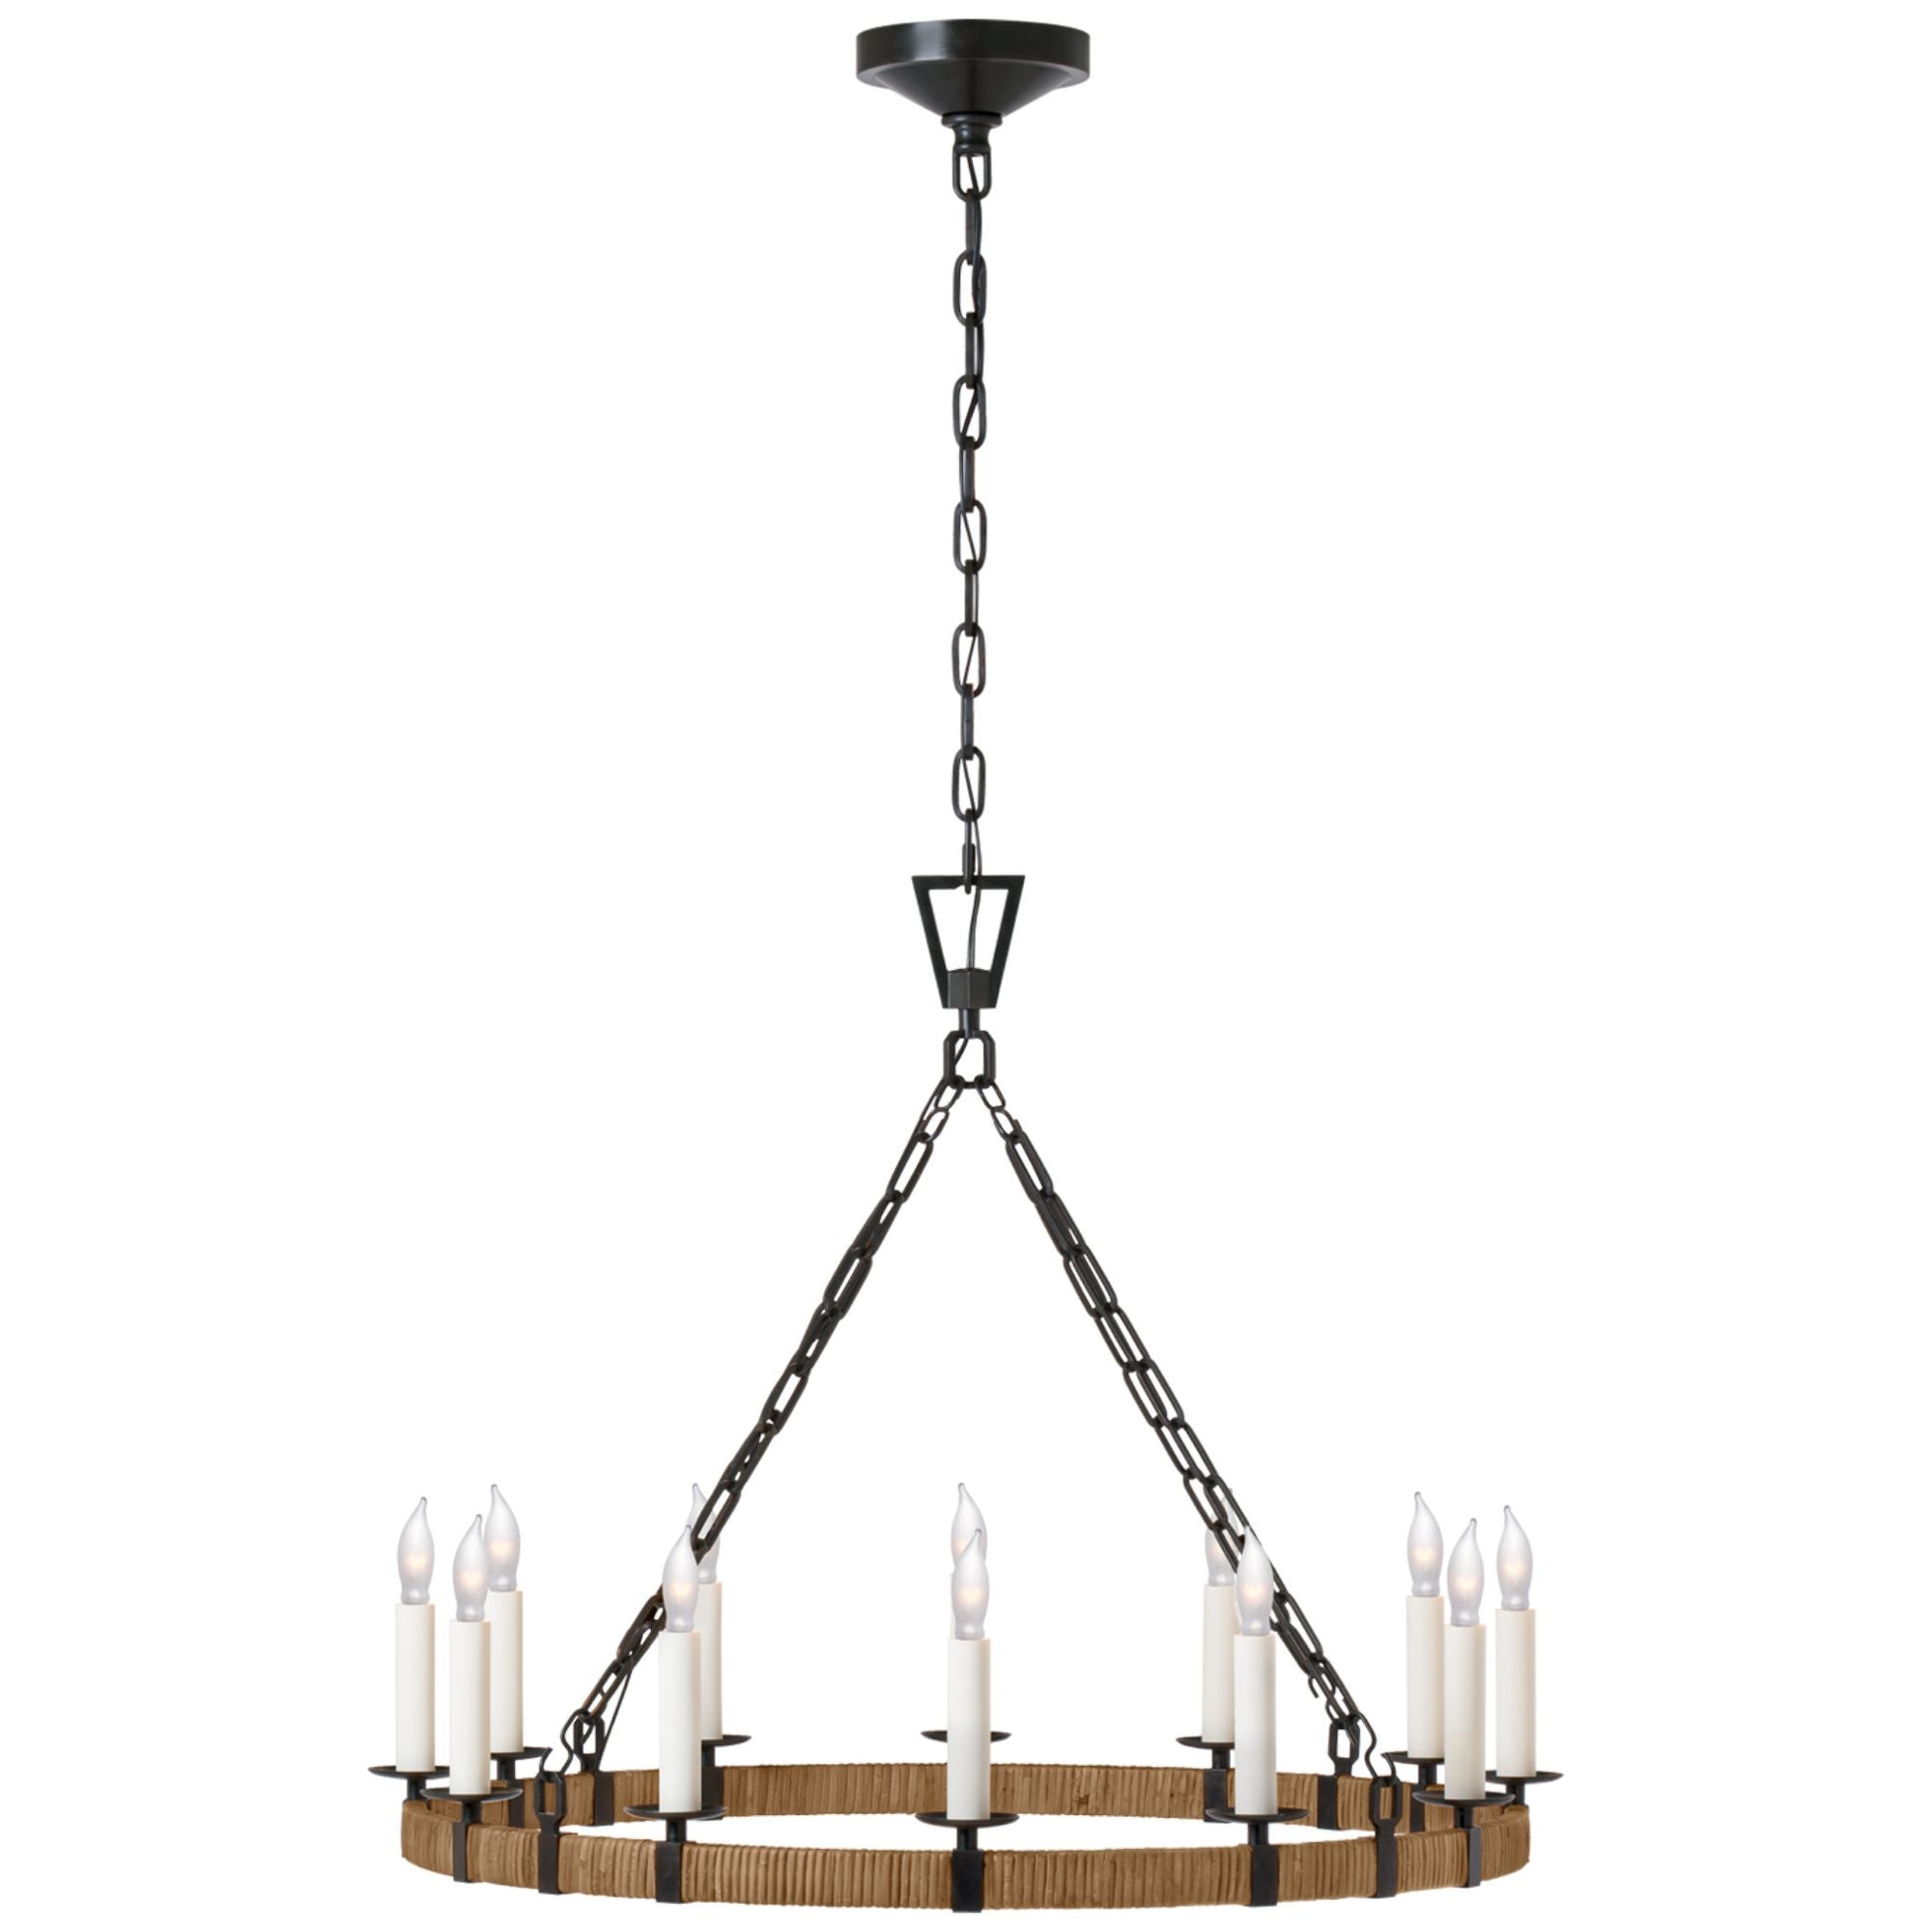 Chapman & Myers Darlana Medium Wrapped Ring Chandelier in Aged Iron and Natural Rattan